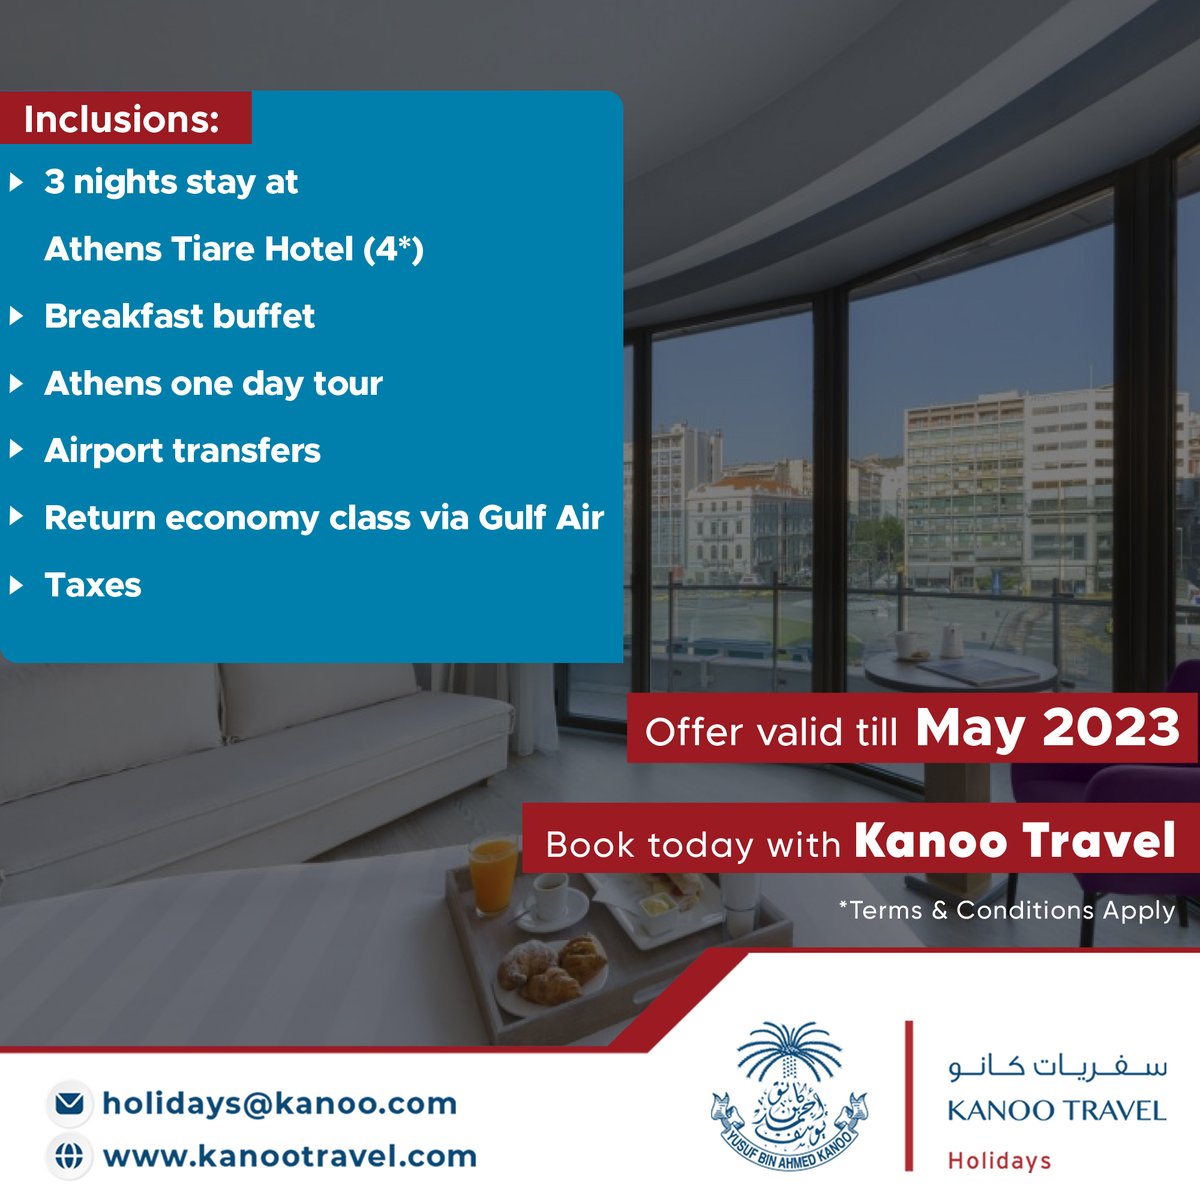 Don't miss this exciting Eid package to Athens!

Offer valid till May 2023.

Book today with Kanoo Travel!

Visit the link in bio for your queries.

*T&C Apply

#KanooTravel #travel #travelagency #greece #athens #visitgreece #visitathens #greecetravel #greecetourism